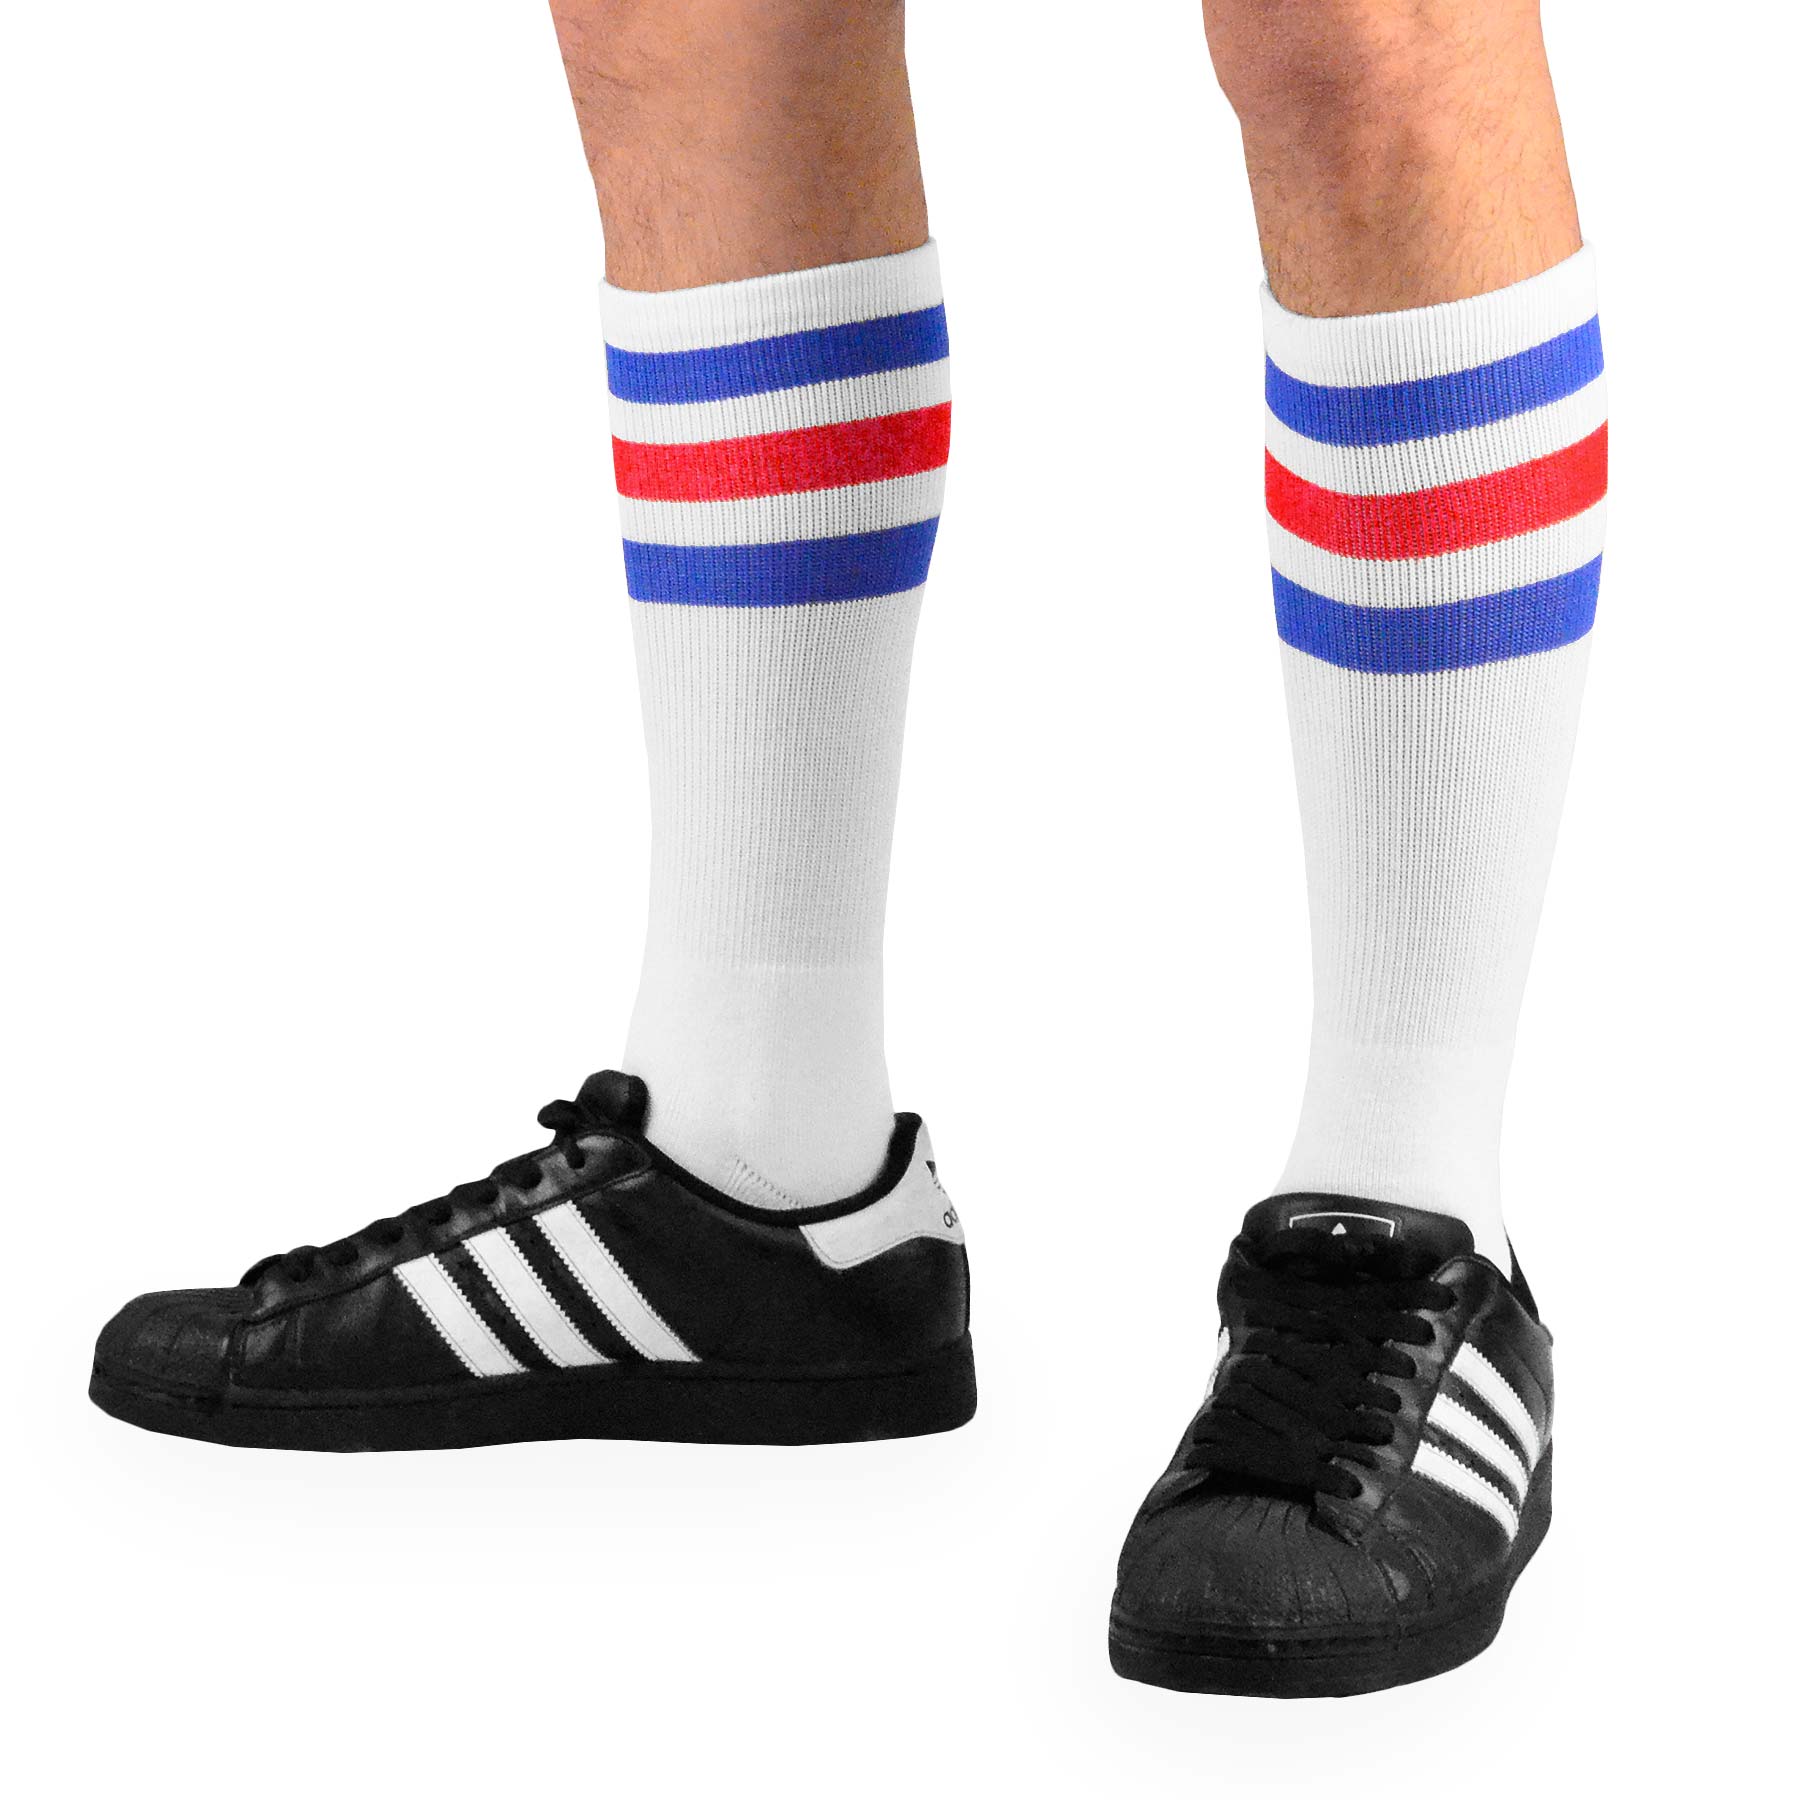 3-Pack Sport Socks Mid-Calf With Red/White/Blue Toe Stripes with